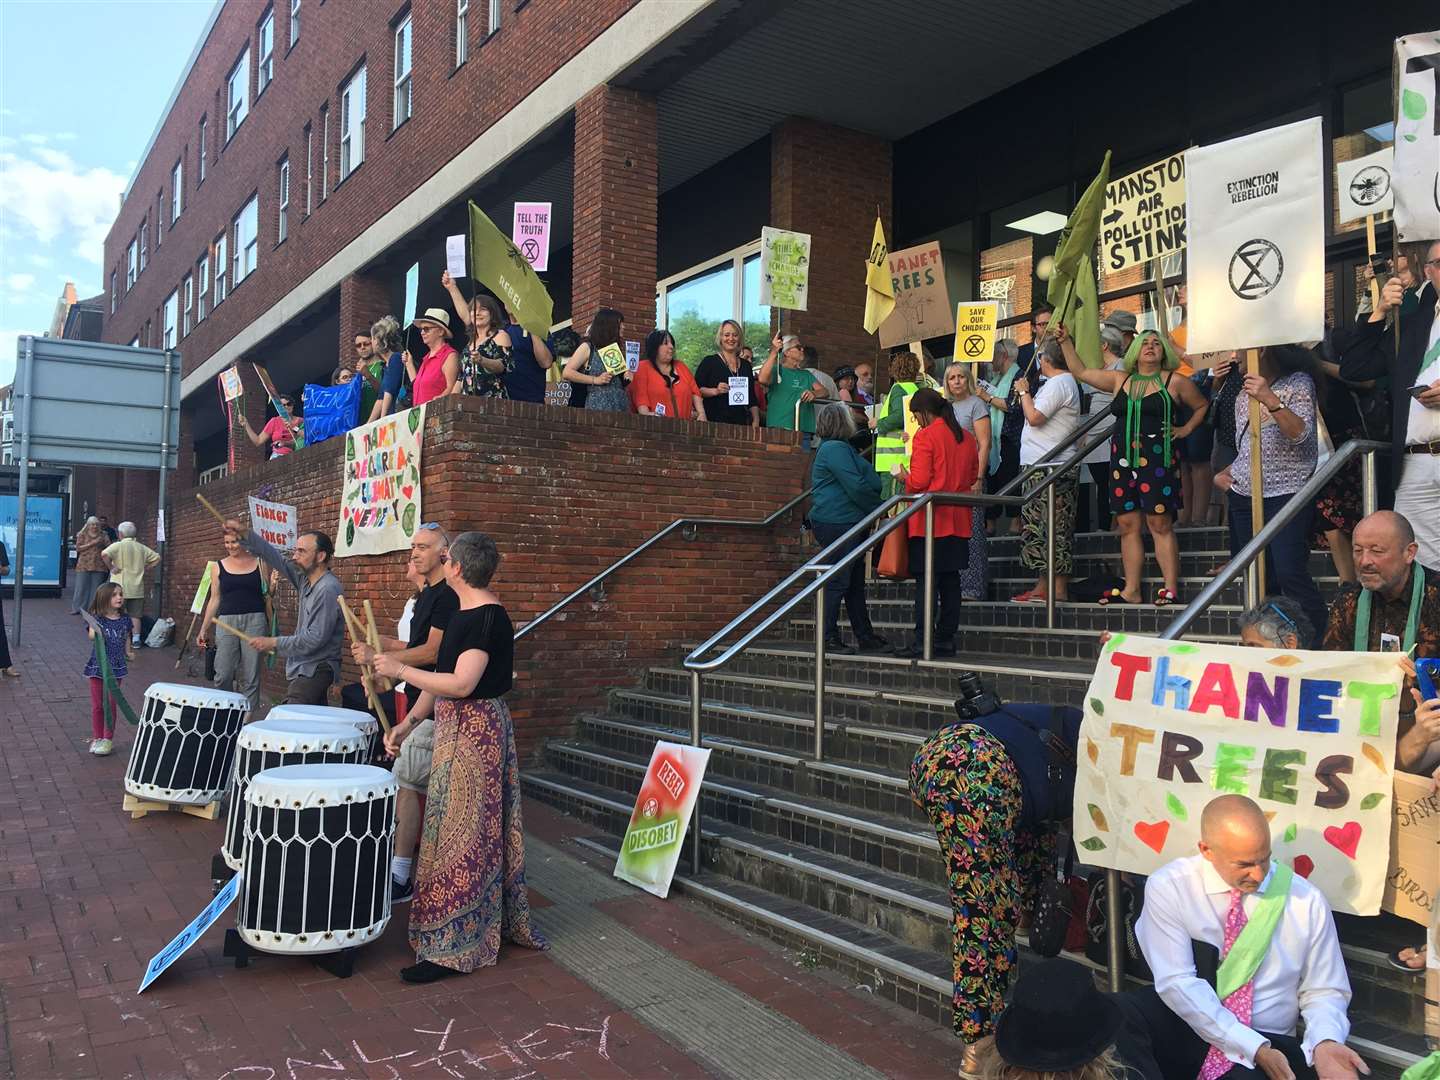 Climate change protest outside Thanet District Council in Margate